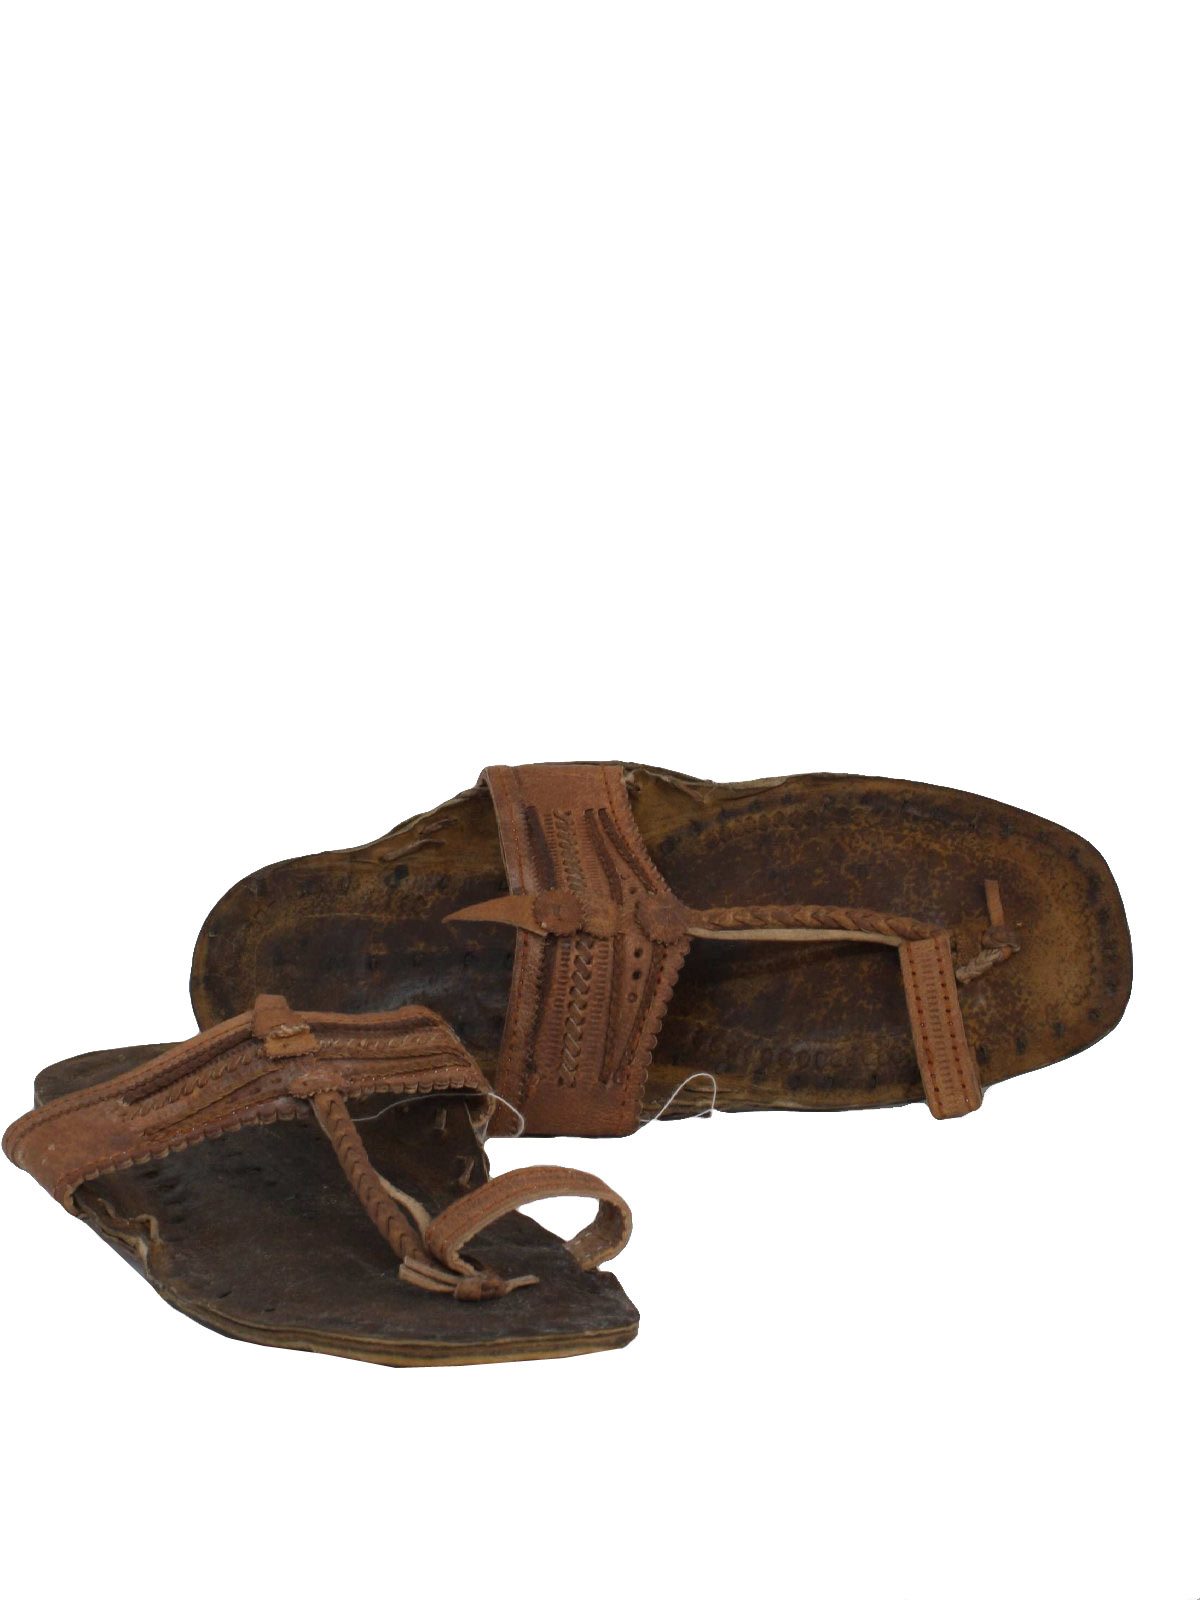 (made recently) - Unisex buffalo leather hippie Jesus sandals ...